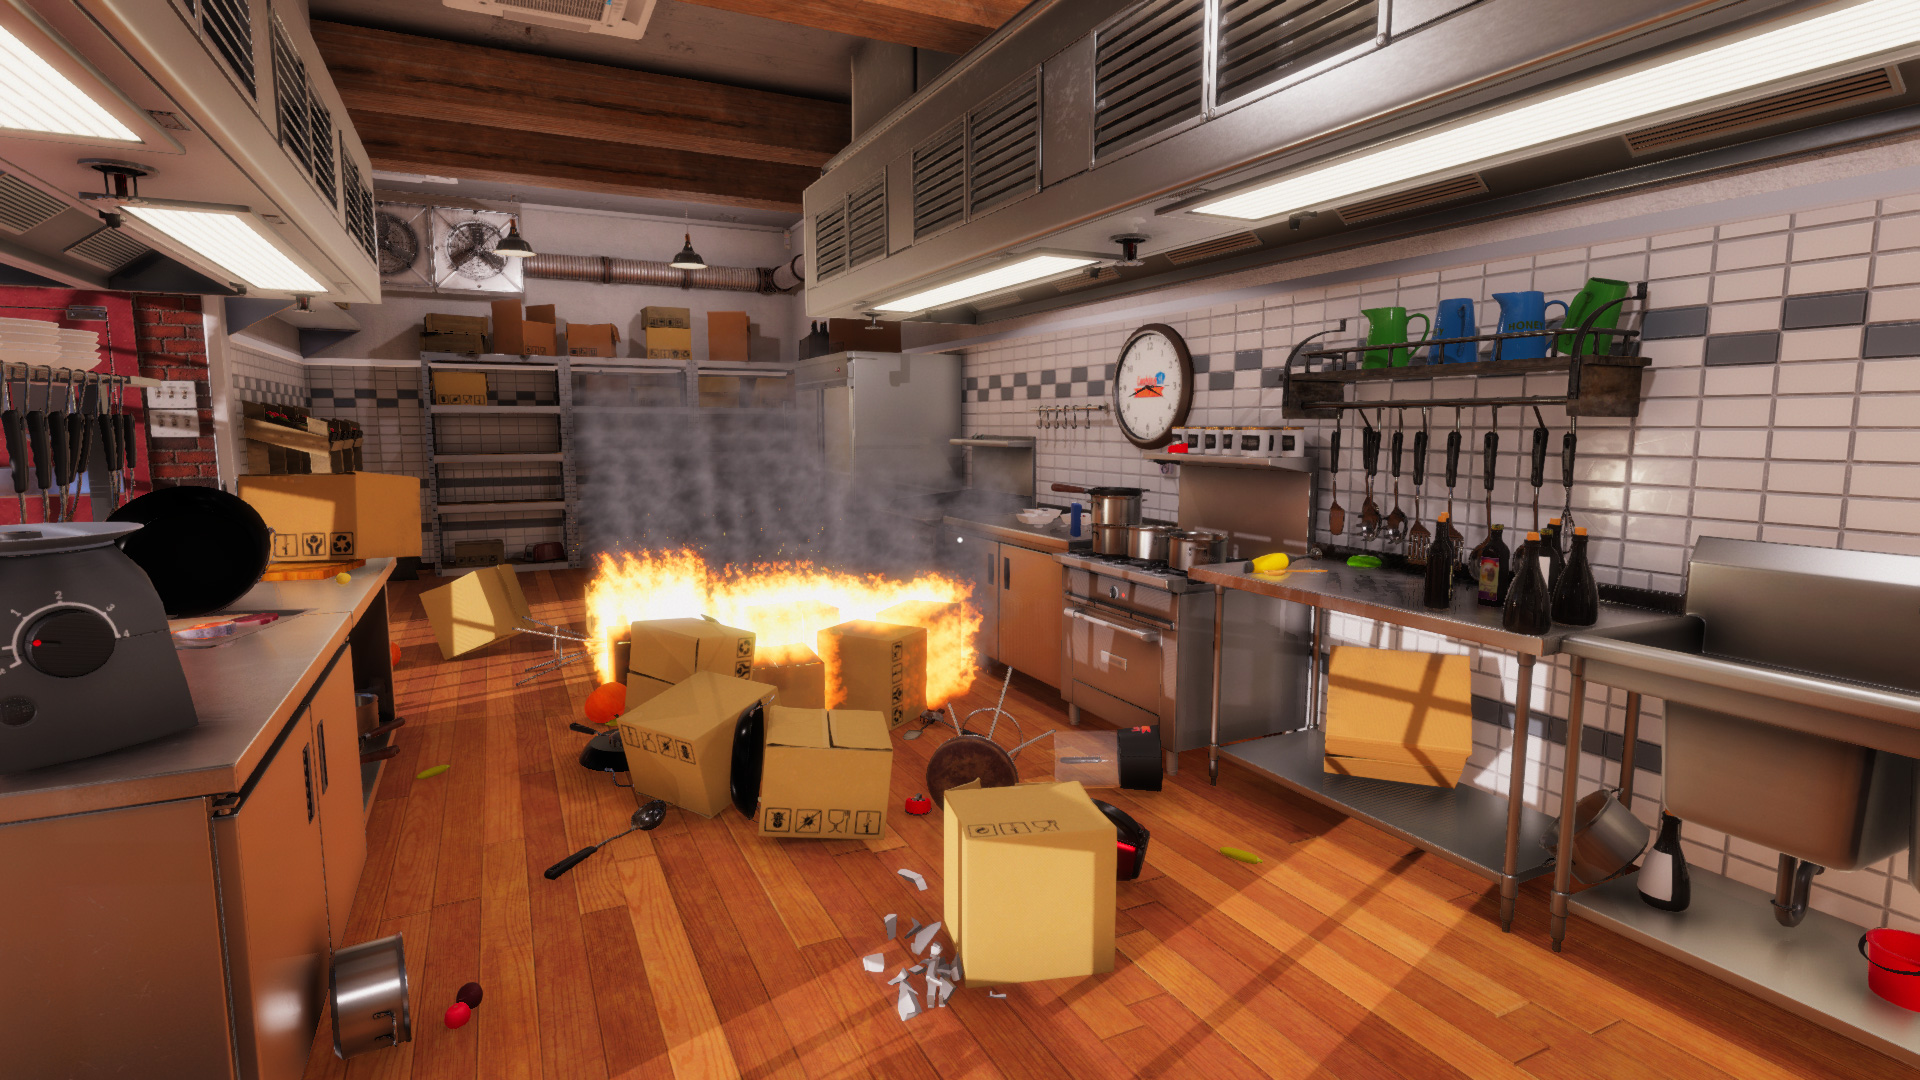 Cooking Simulator, Cooking Simulator Mobile is available in the Google  Play Store in the Pre-Registration stage. In the next weeks, the iOS  version will be available for, By PlayWay